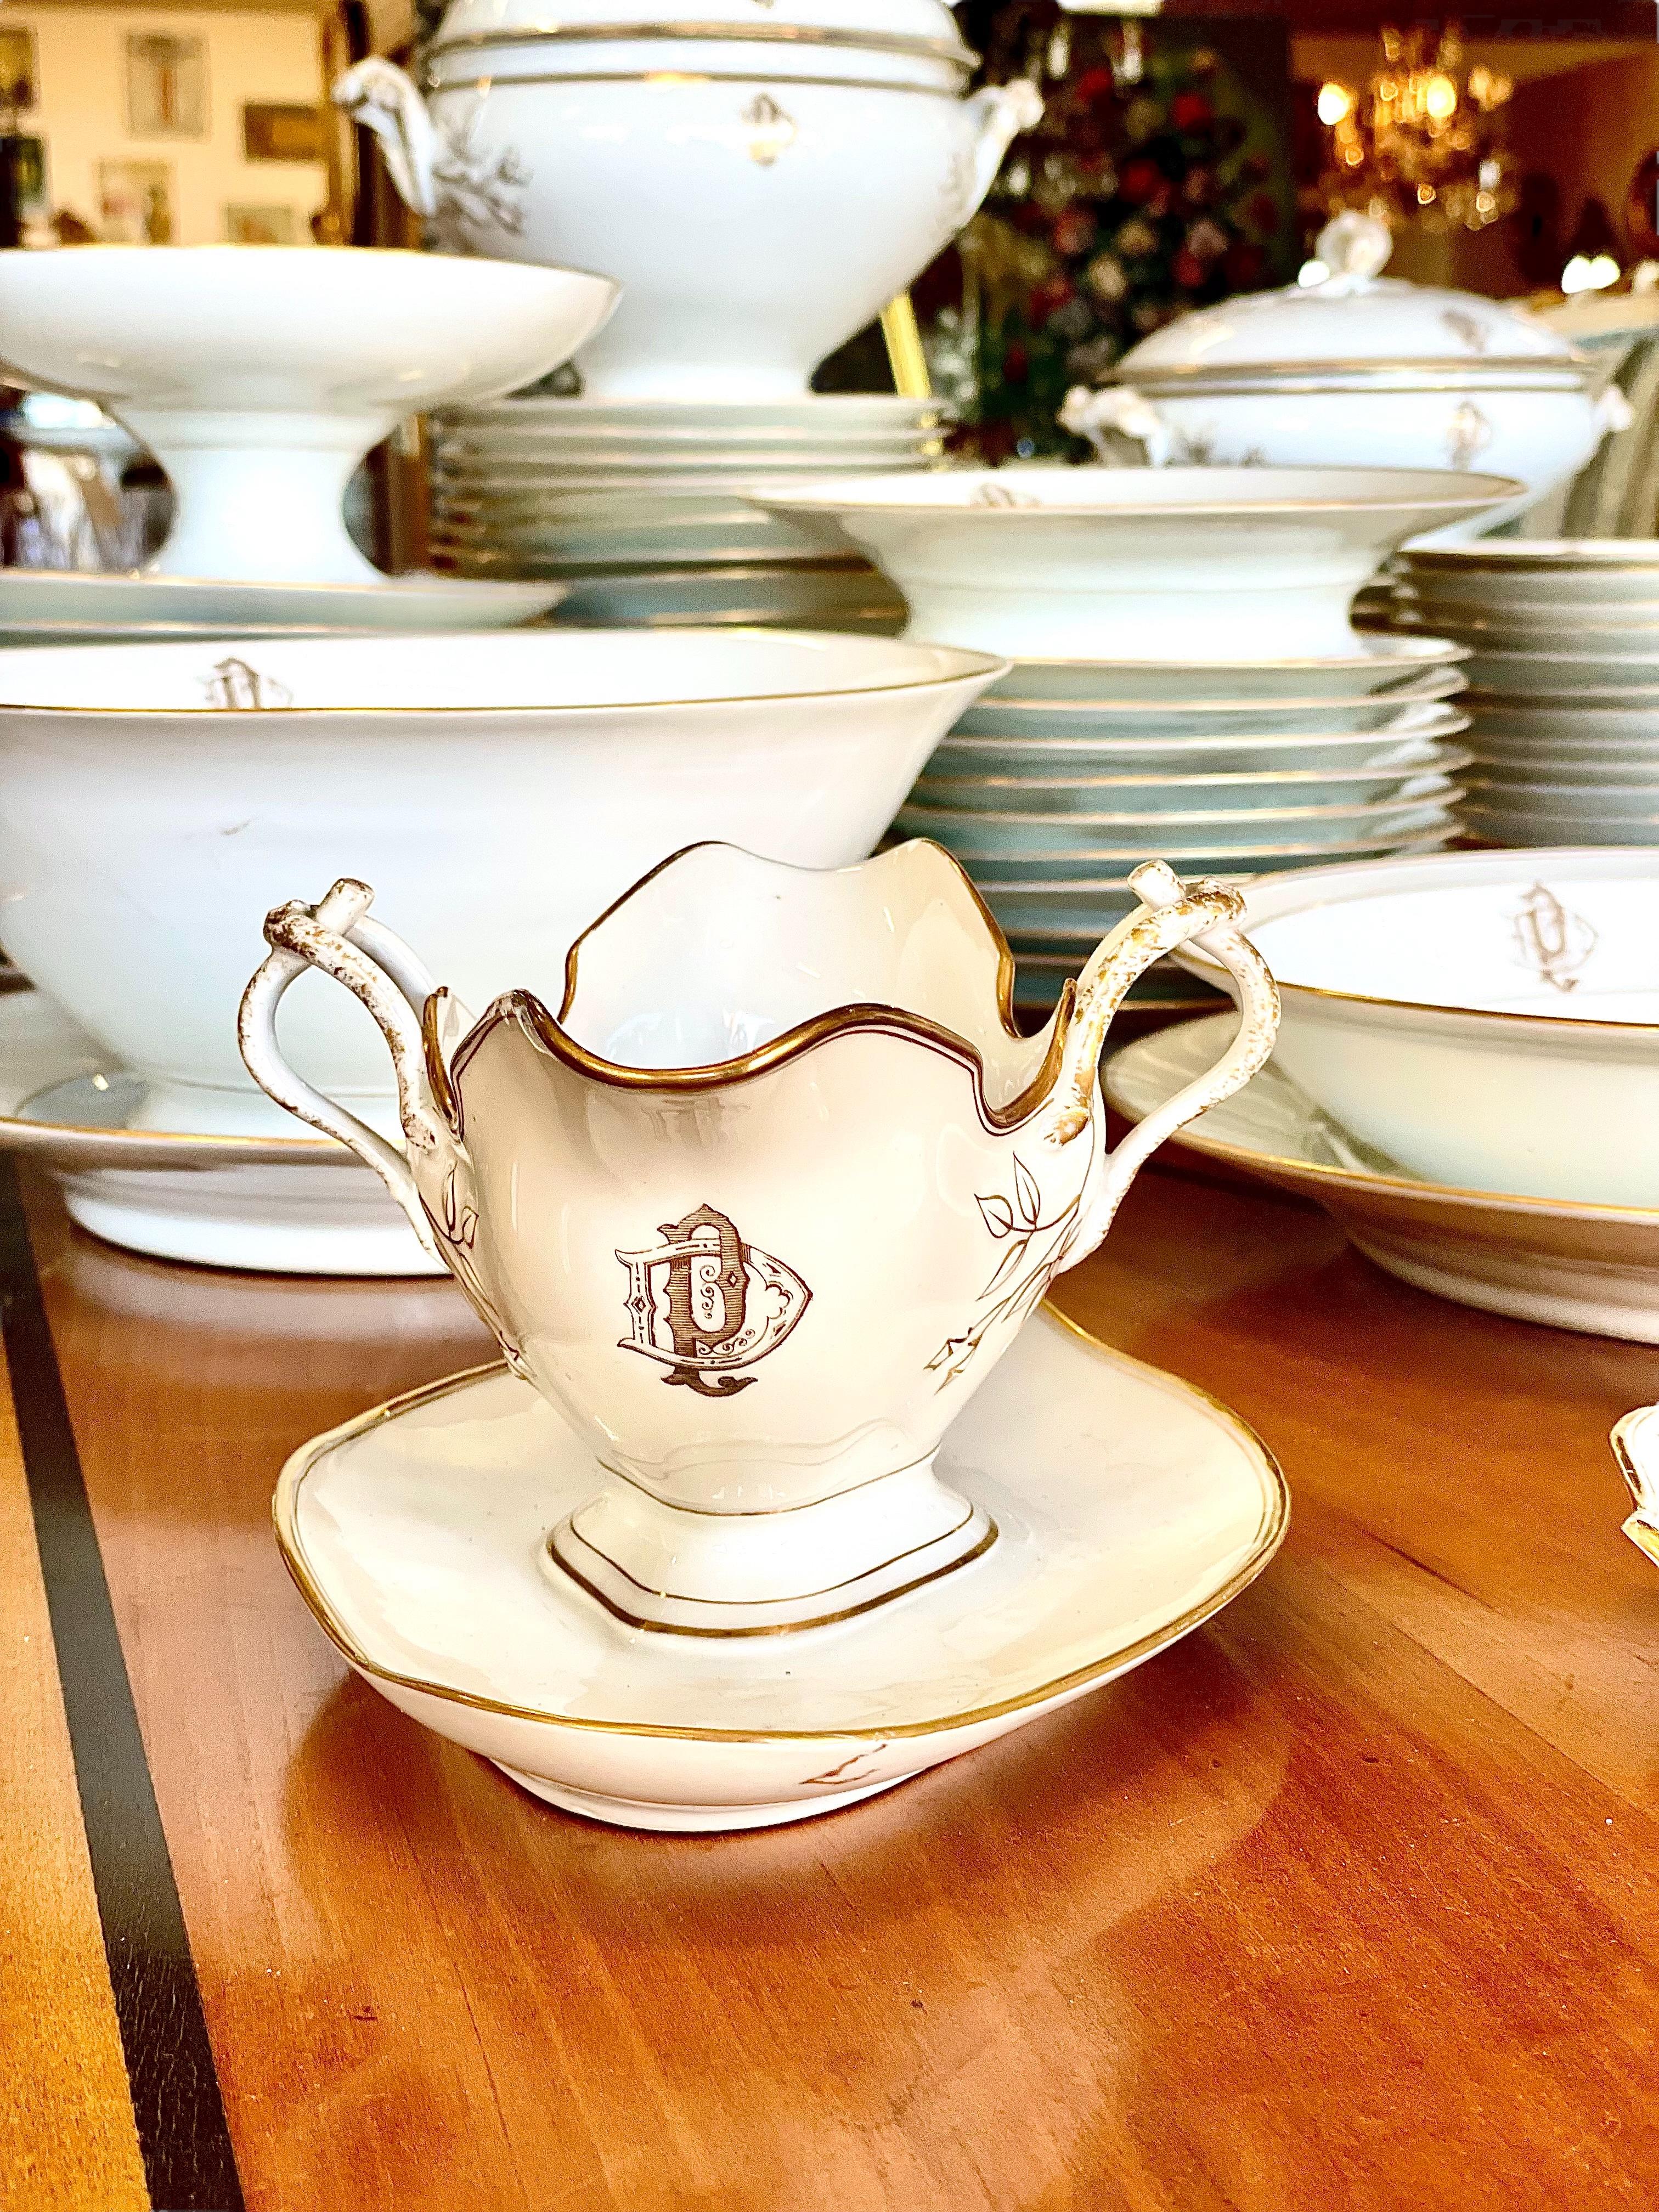 Limoges Porcelain Set of 50 Piece Dinner Service with Gilt Edges and Monogramme For Sale 2